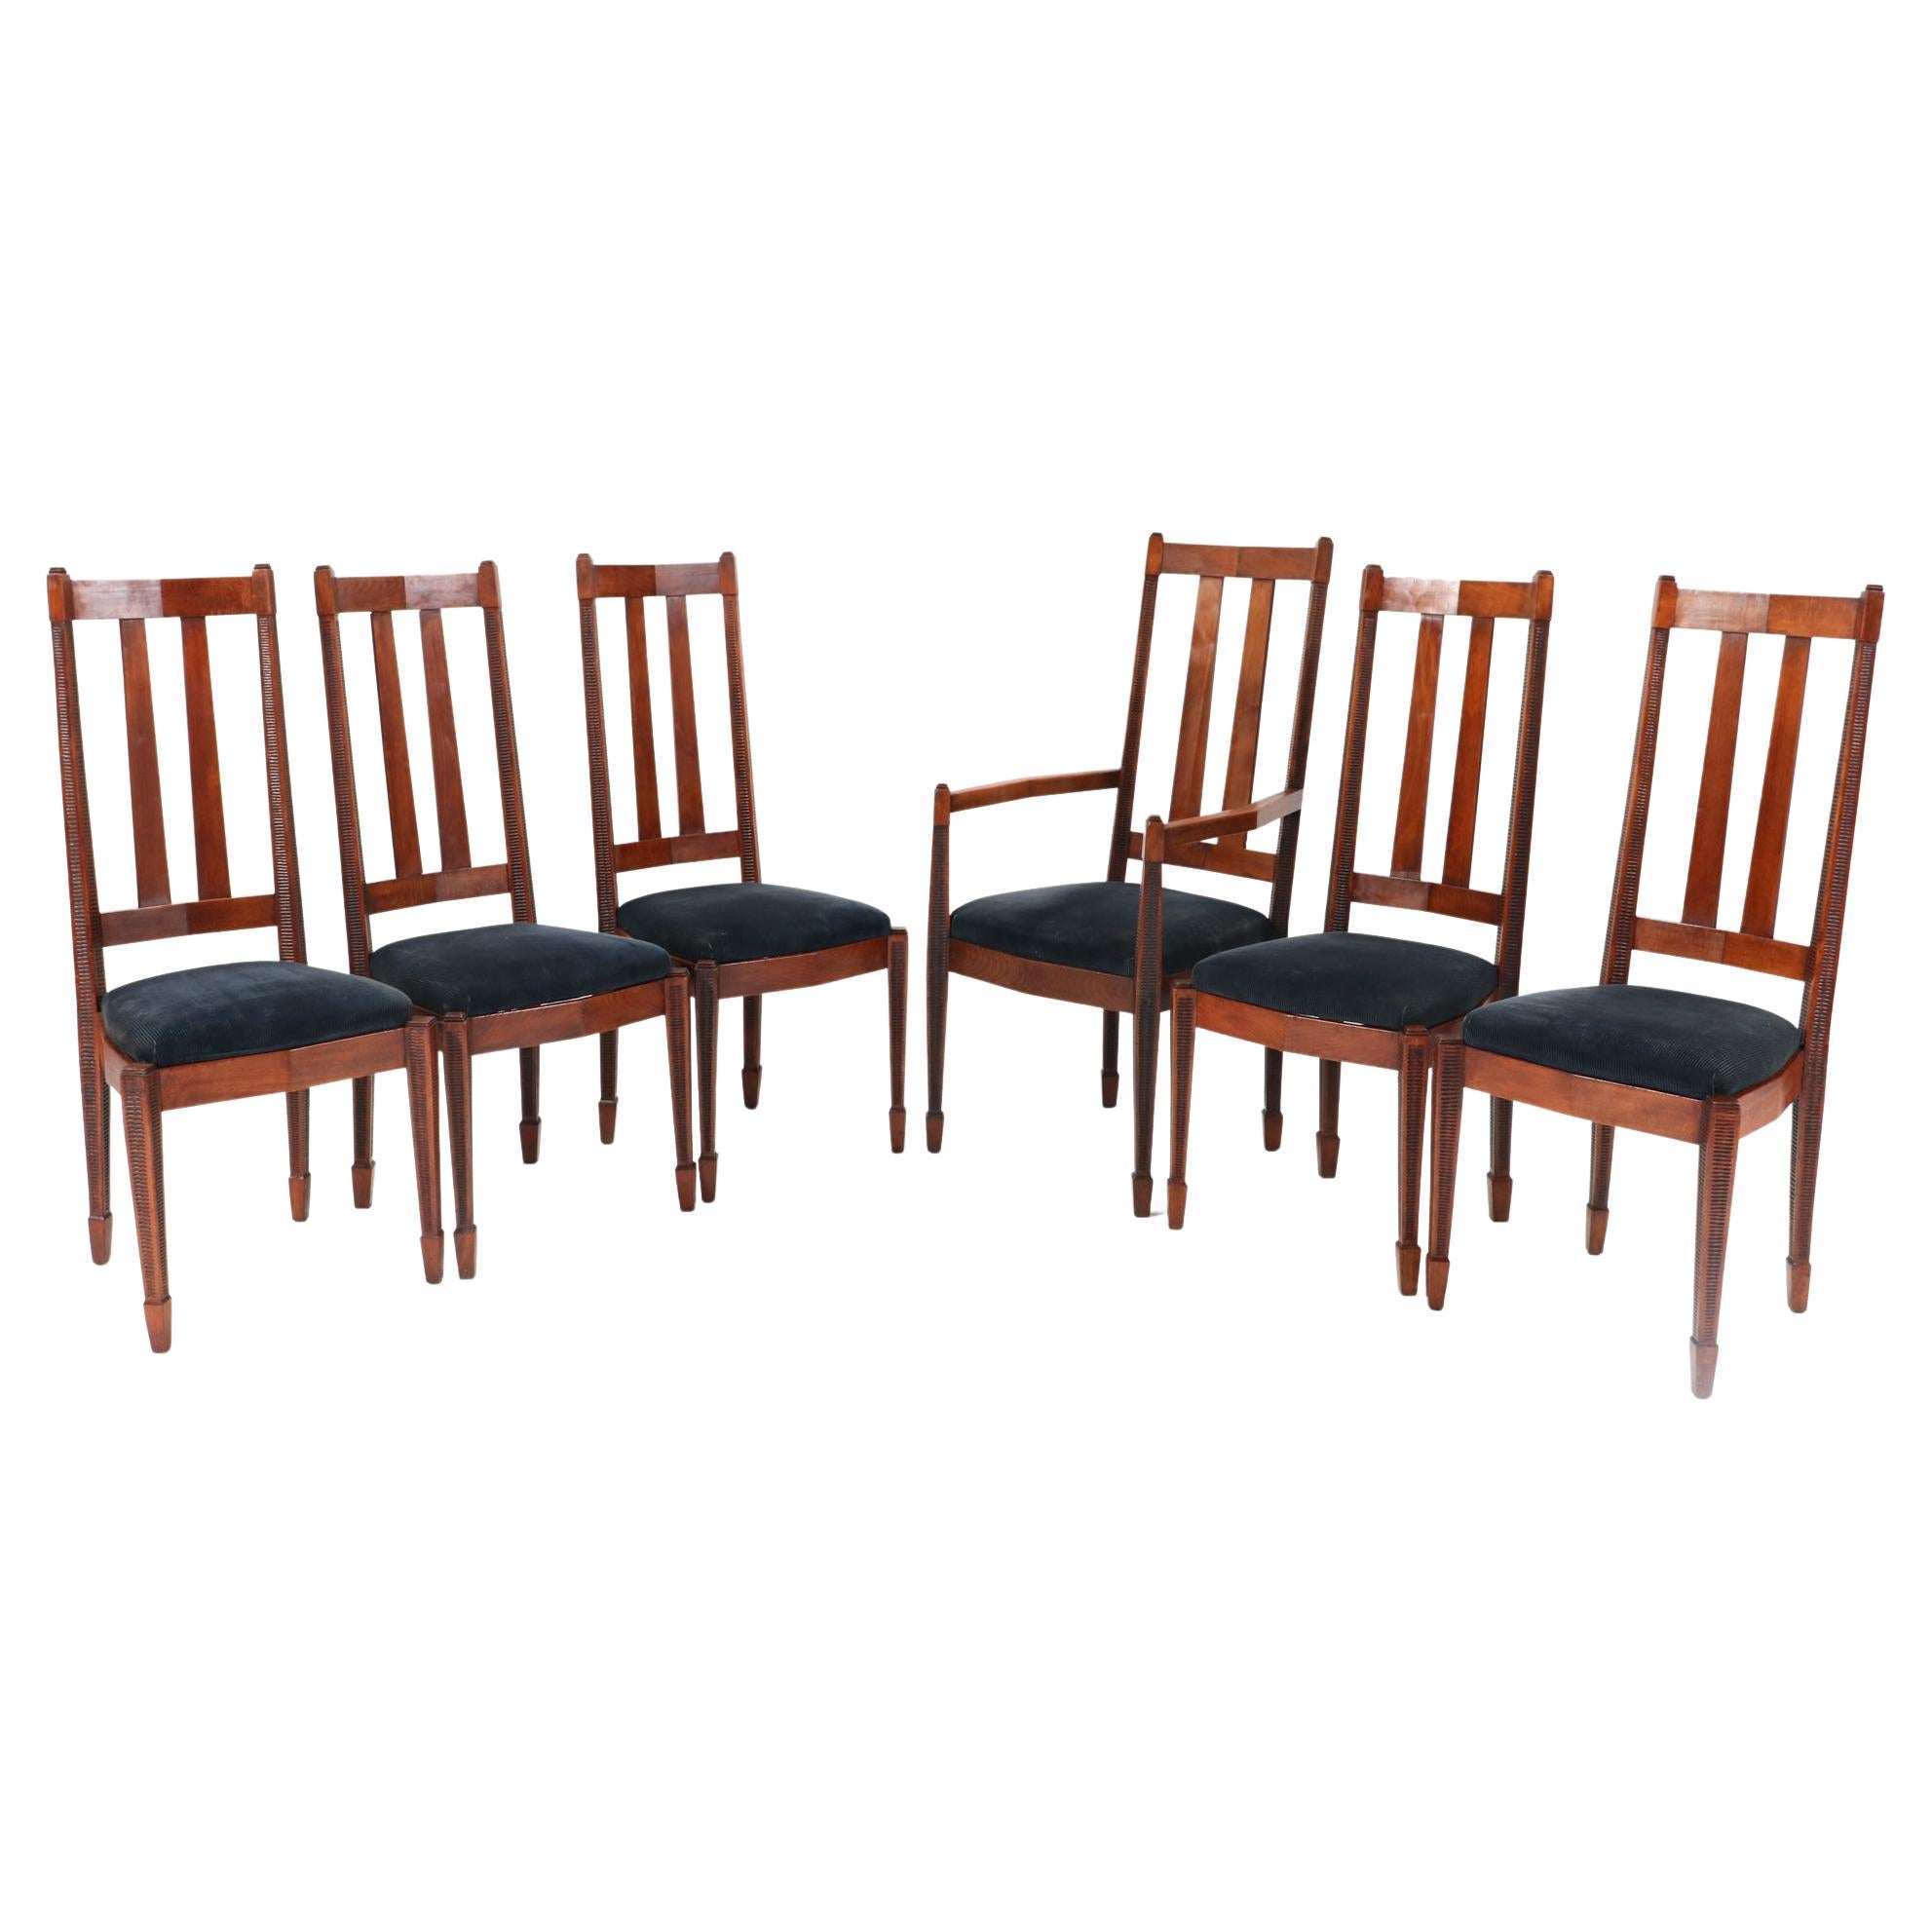 Set of Six Art Deco Amsterdamse School High Back Dining Room Chairs, 1920s For Sale